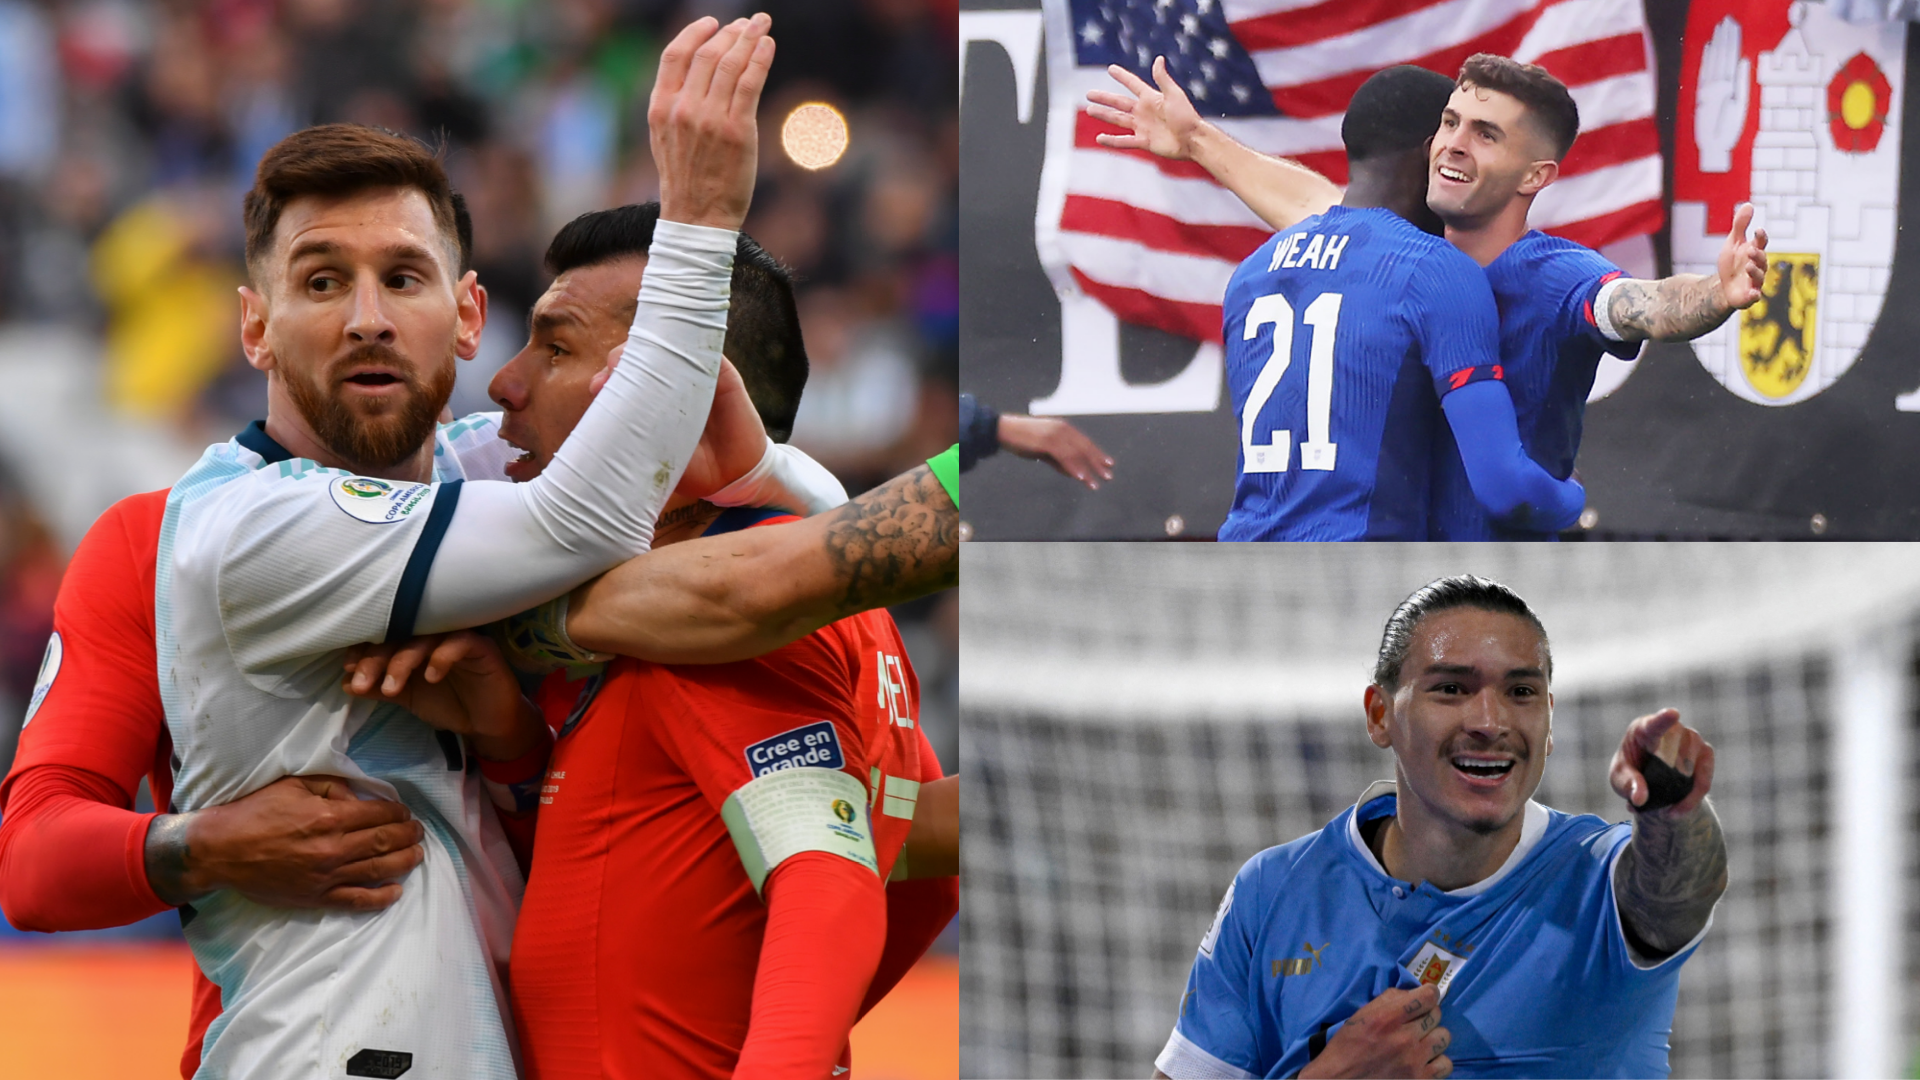 Copa América draw: USMNT gets Uruguay, the toughest possible group opponent